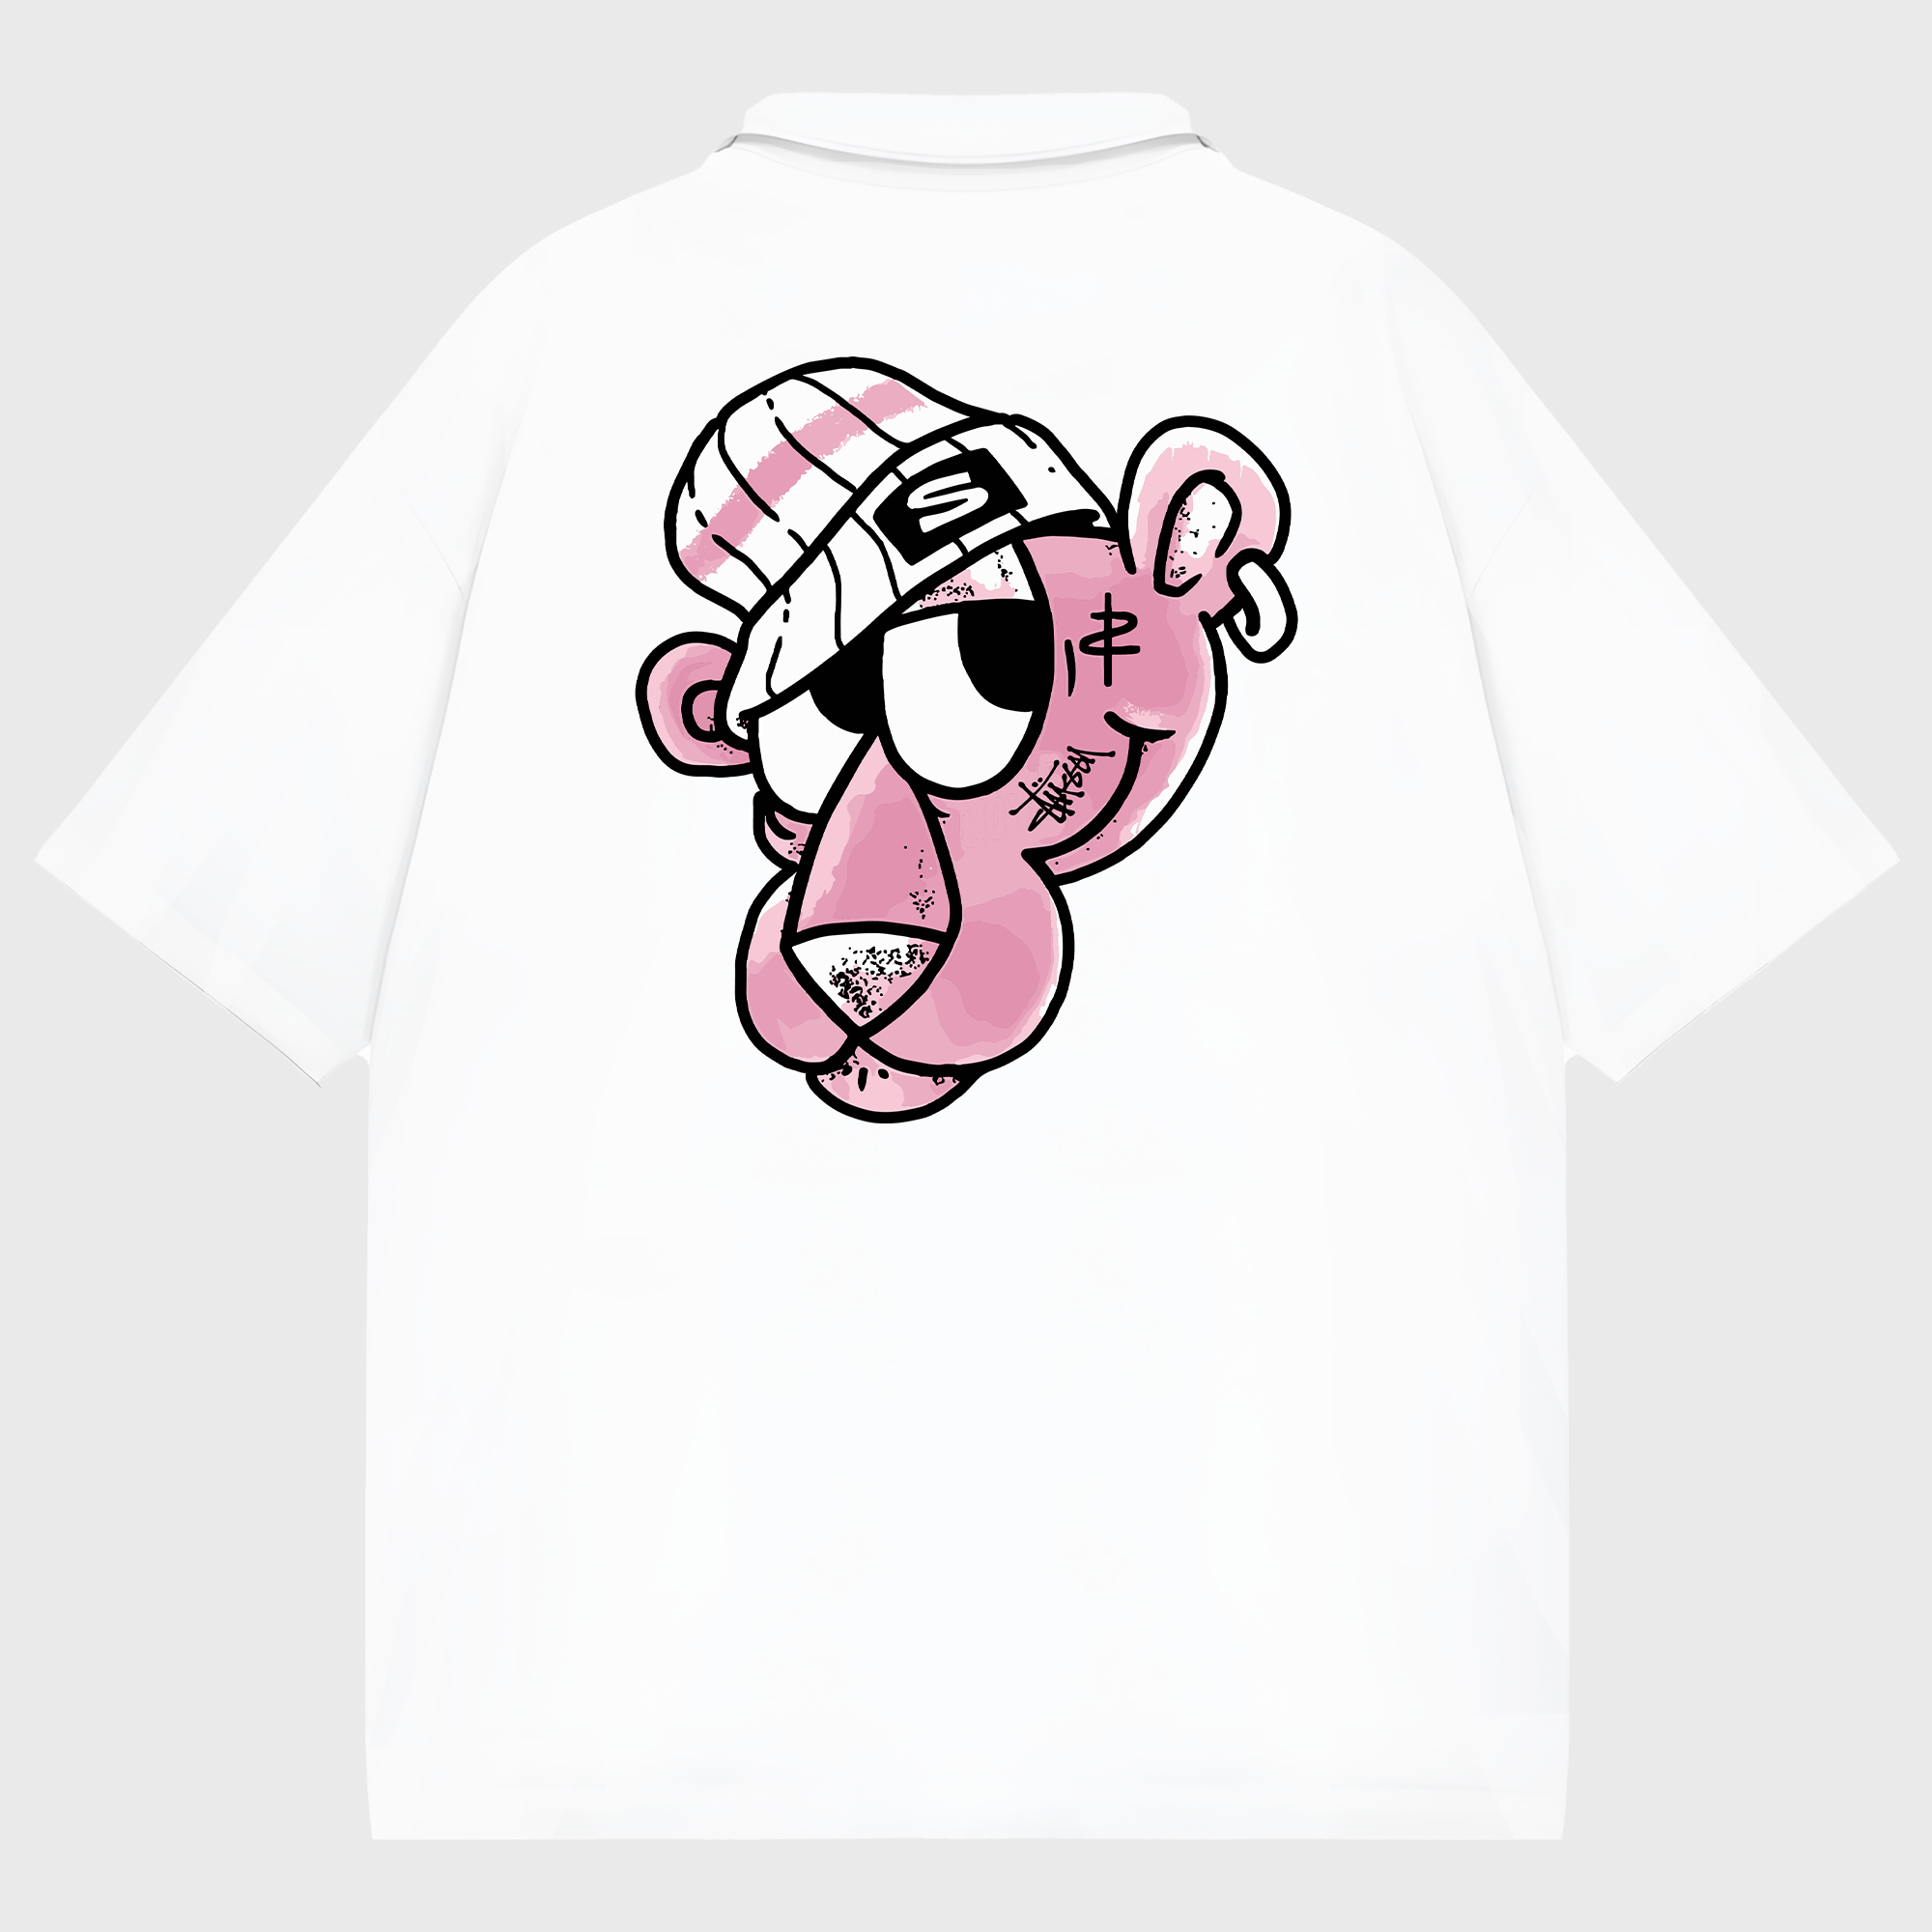 Stussy Tattoo Pink Panther Polo